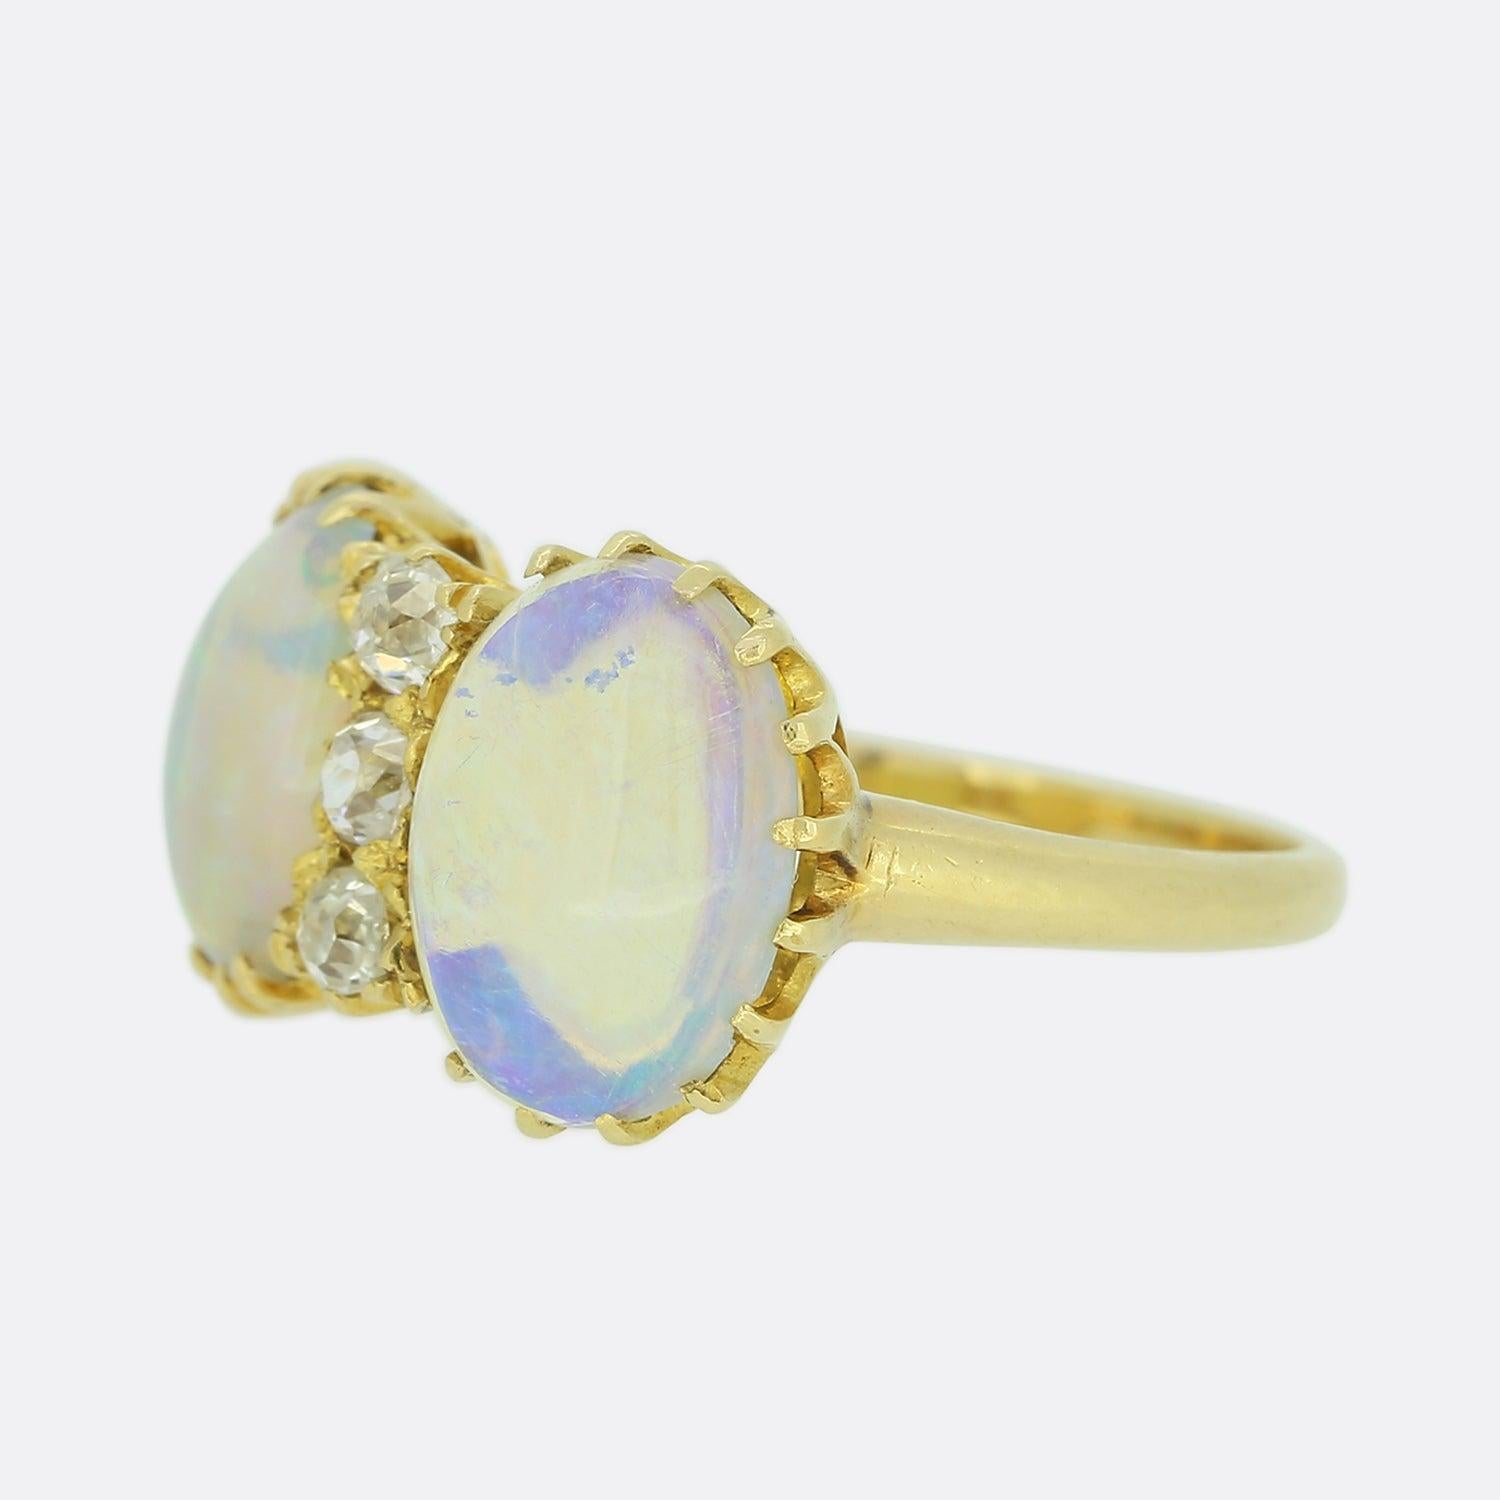 This is an antique French opal and diamond ring. The ring features two oval cabochon opals that have a channel of three old cut diamonds set in between each opal. The opals has a lovely subtle play of colour and the diamonds have a lovely sparkle.